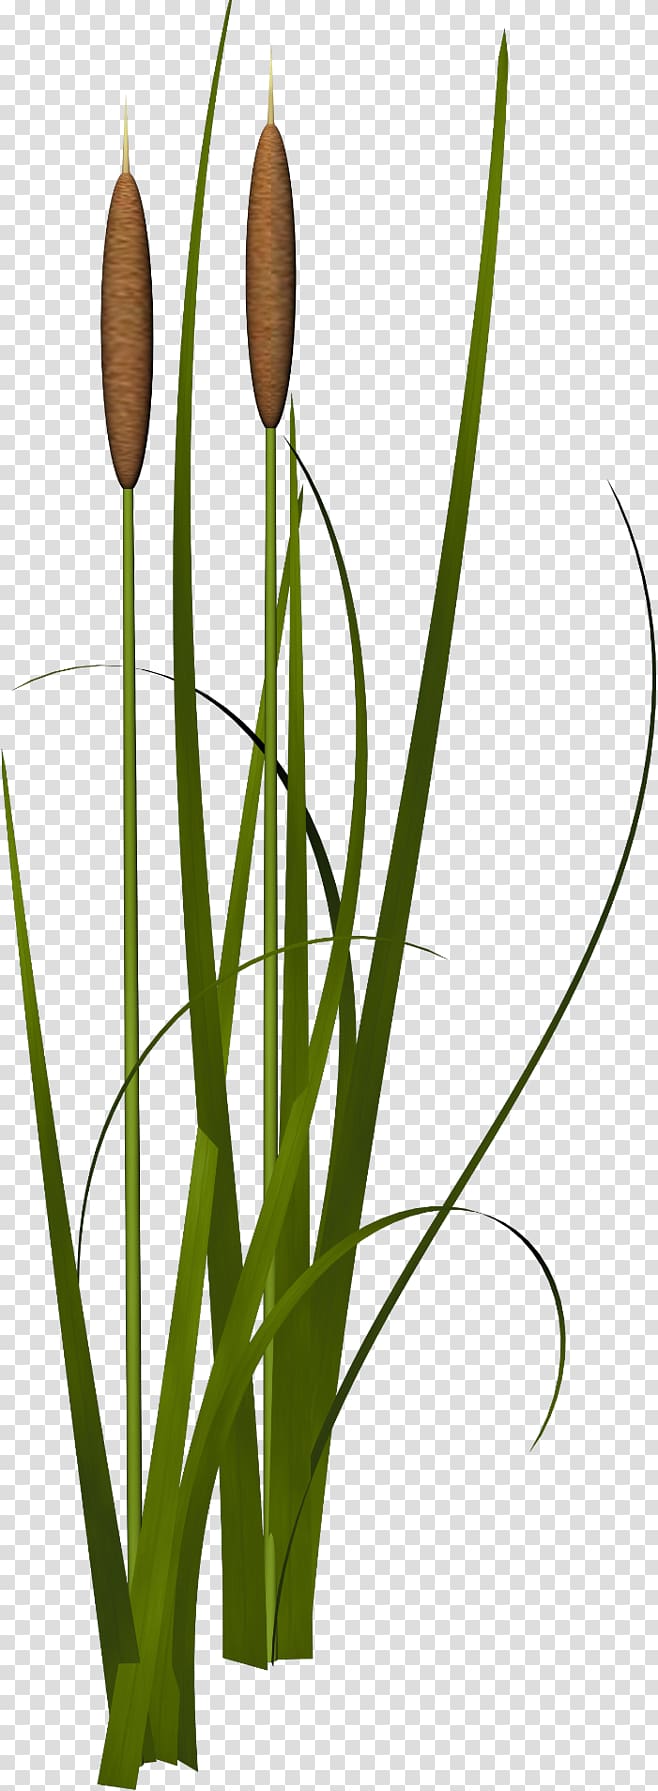 Reed Icon, Grass,leaf,green,reed transparent background PNG clipart